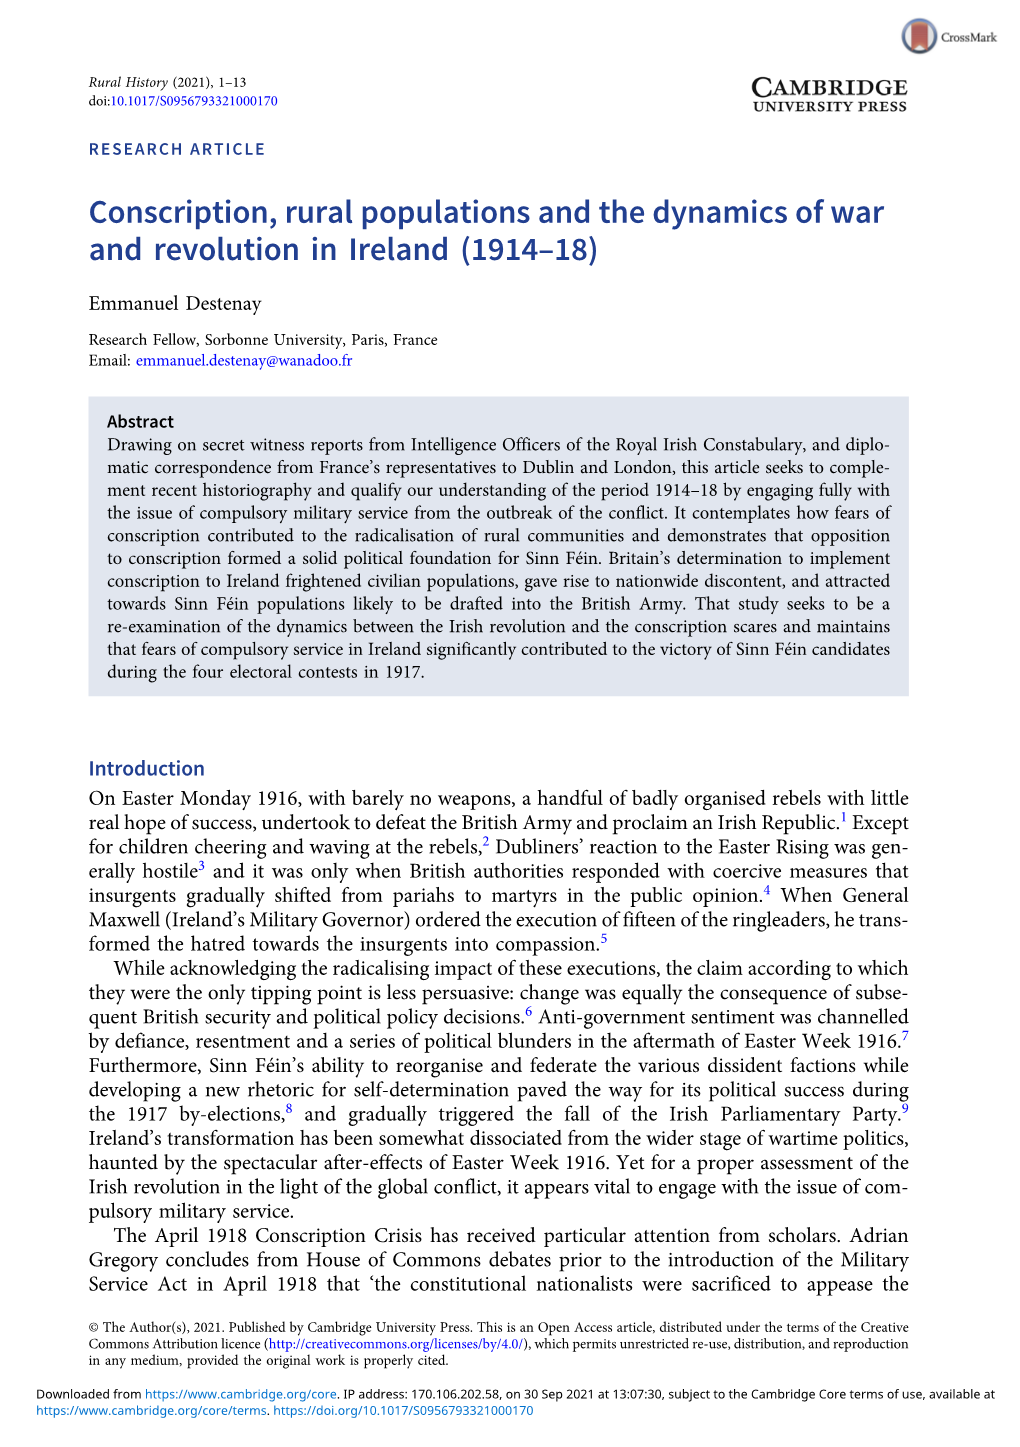 Conscription, Rural Populations and the Dynamics of War and Revolution in Ireland (1914–18)